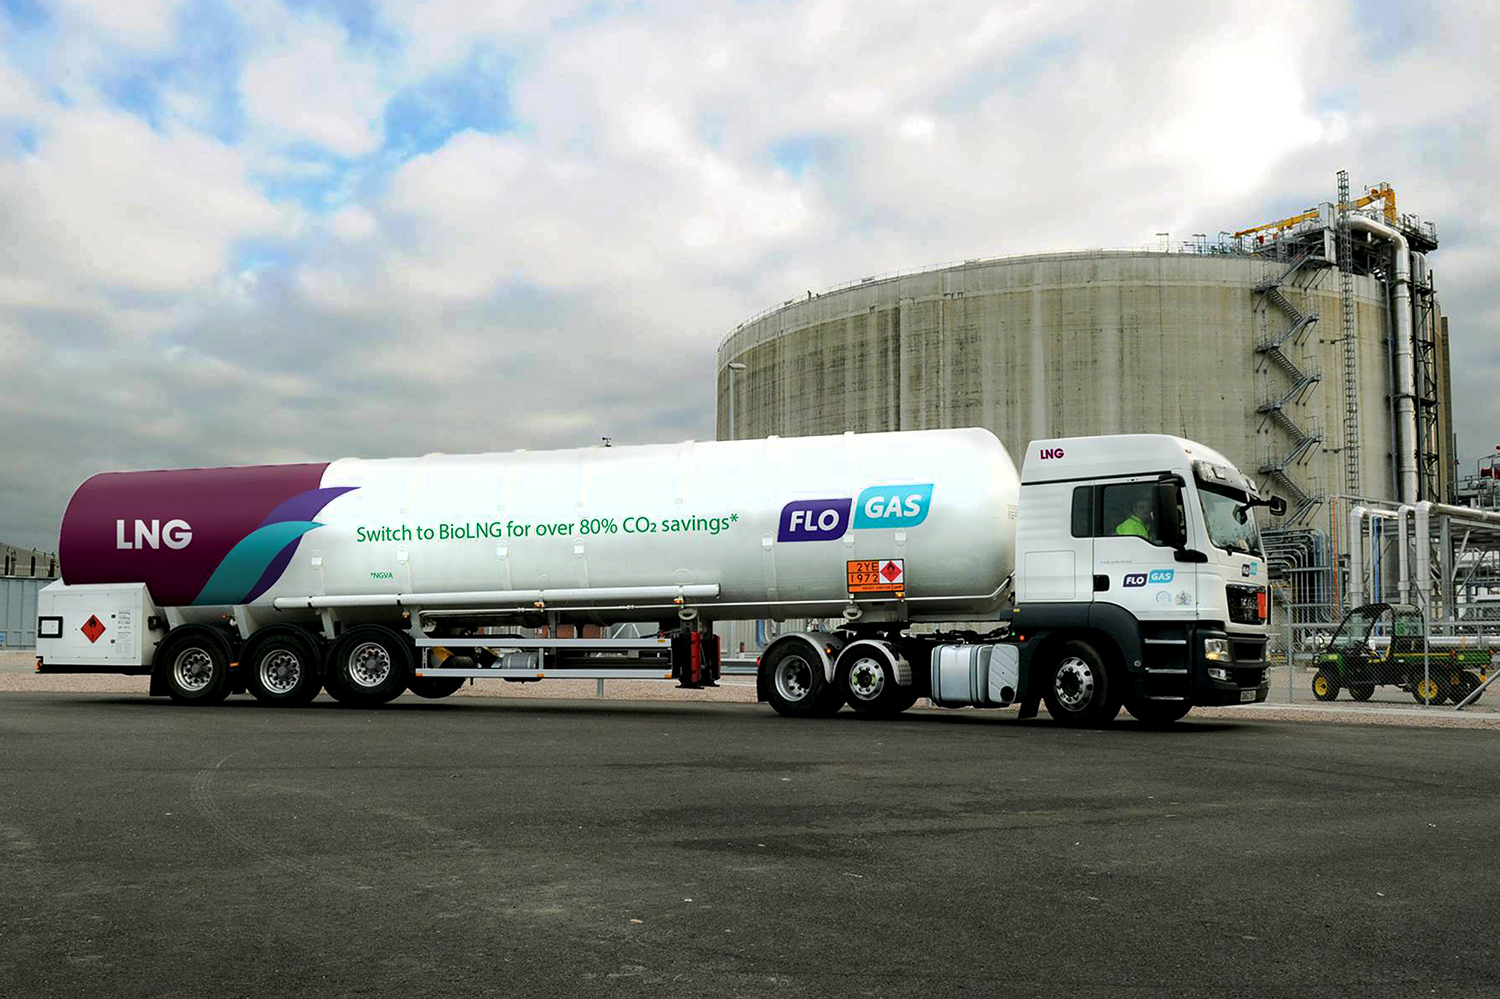 Flogas offers customers new Bio-LNG solution